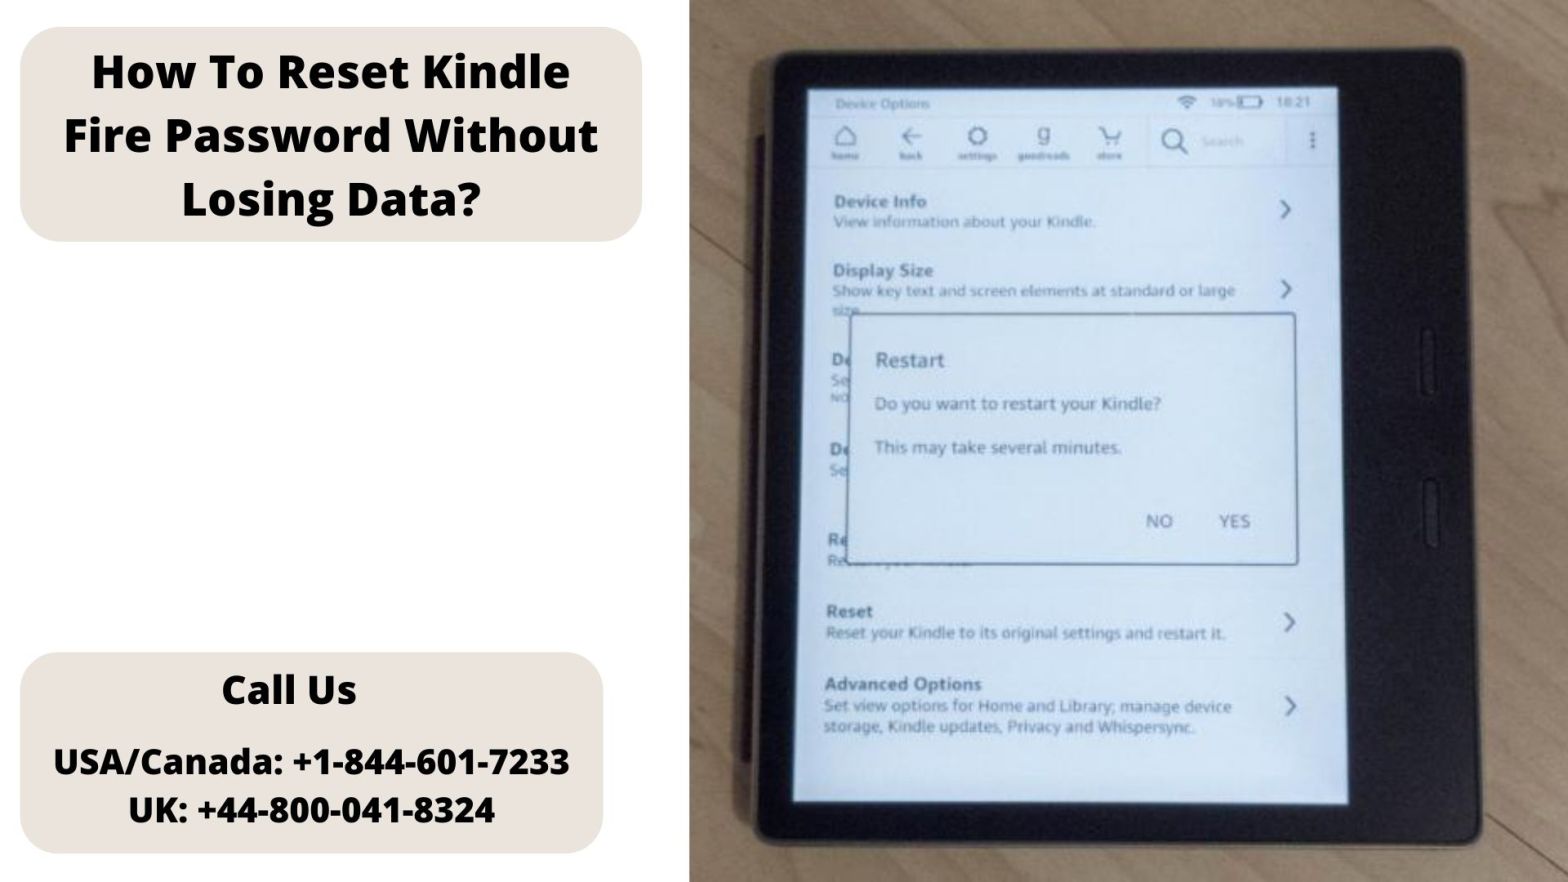 how to reset a kindle fire password